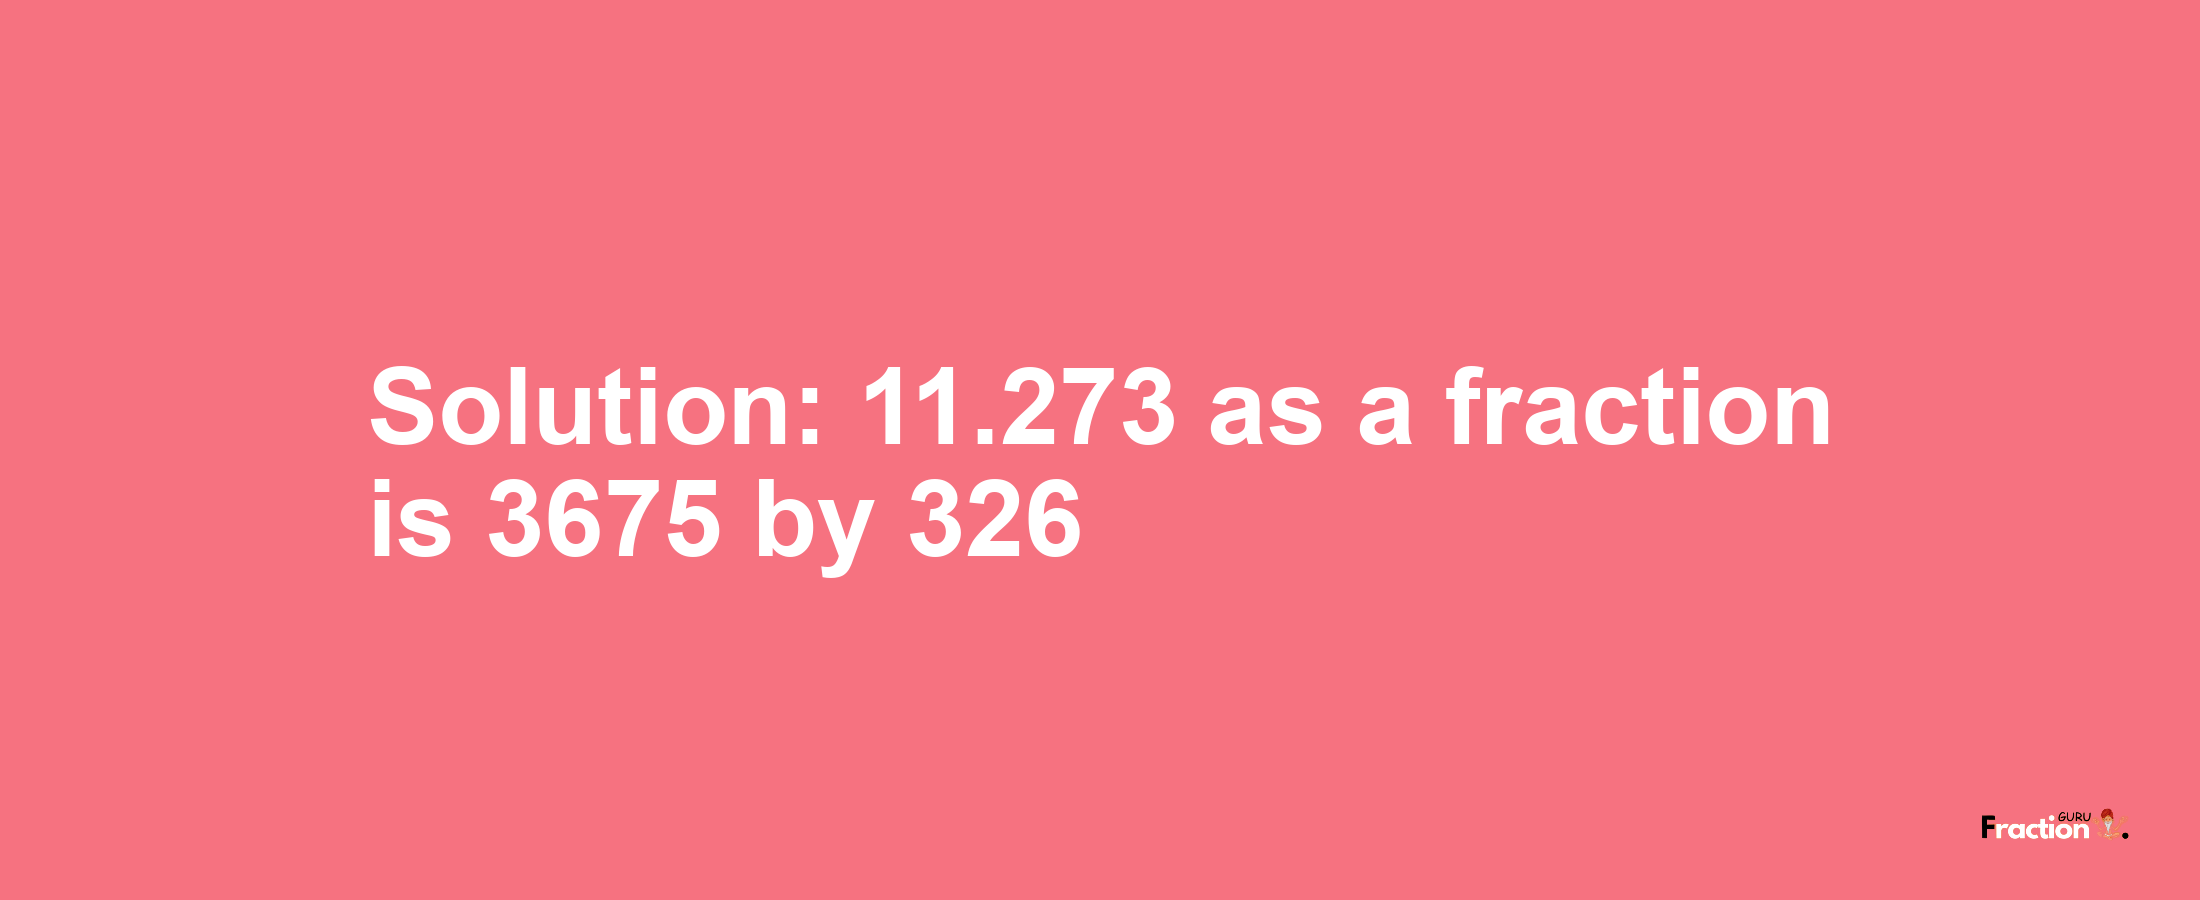 Solution:11.273 as a fraction is 3675/326